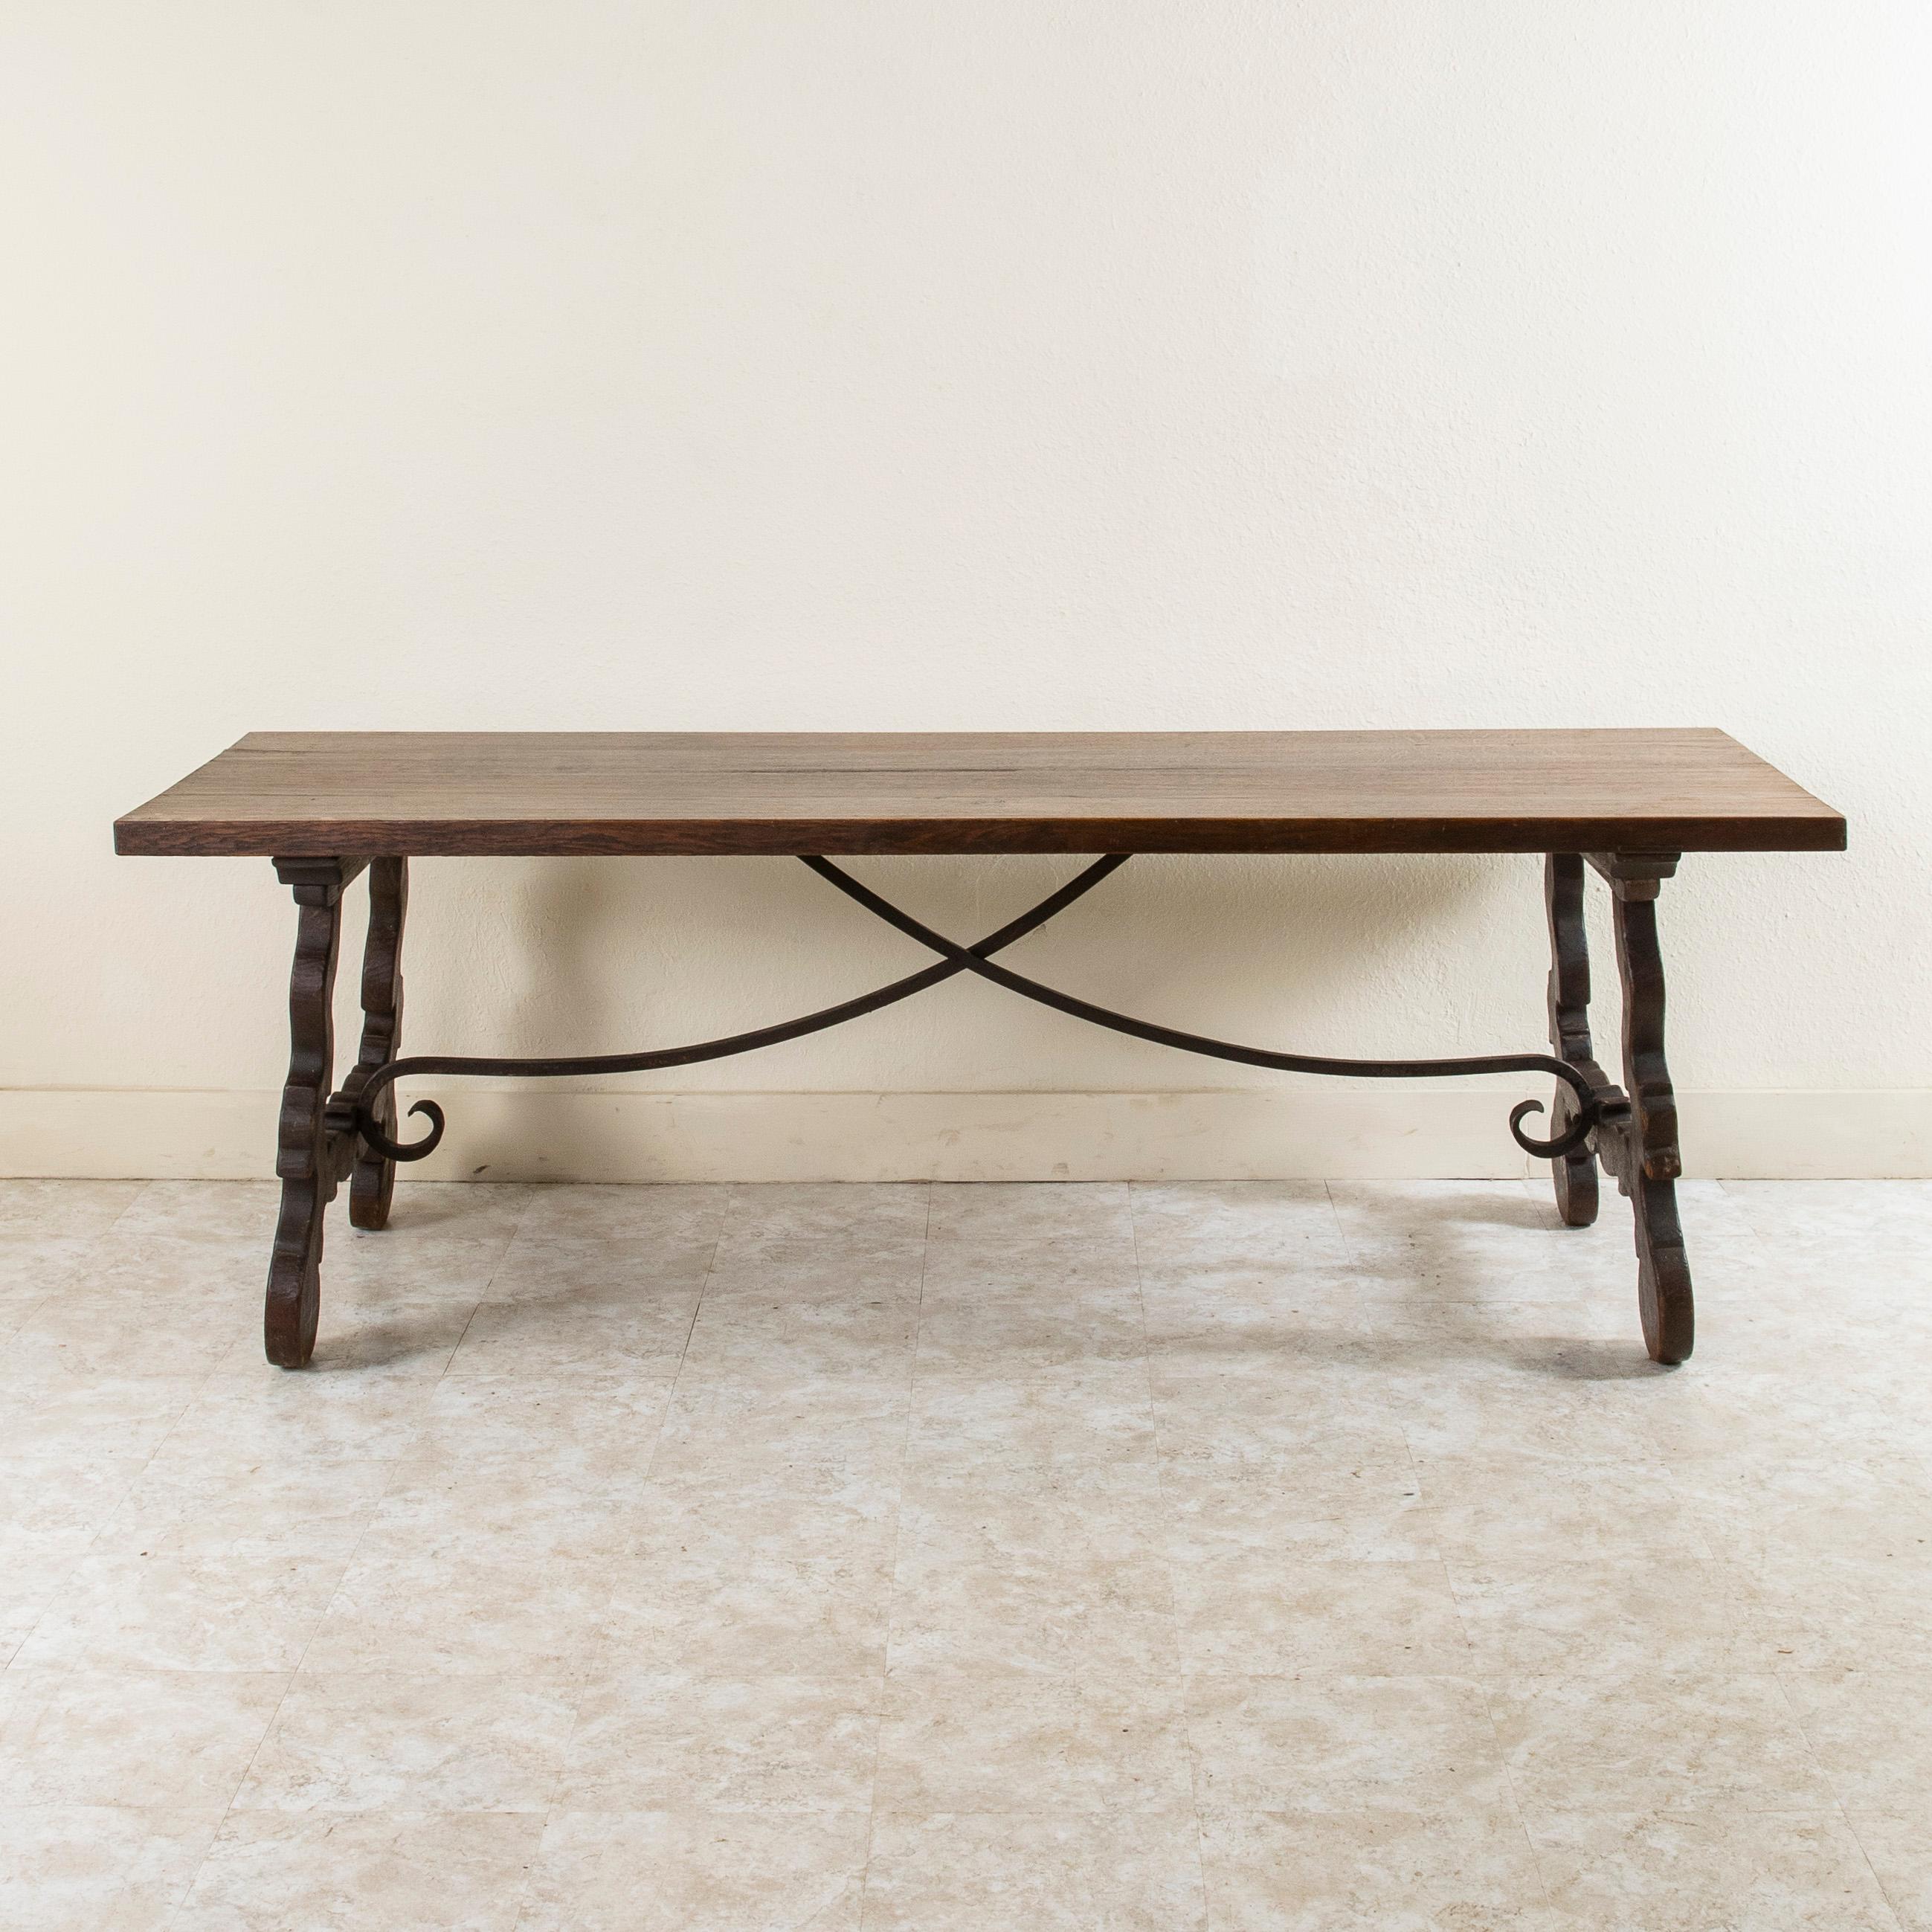 This large Spanish Renaissance style oak dining table from the turn of the twentieth century features a hand forged iron trestle and a hand-hewn 1.75 inch thick top constructed of four planks of wood. Its thick solid oak construction and dark patina